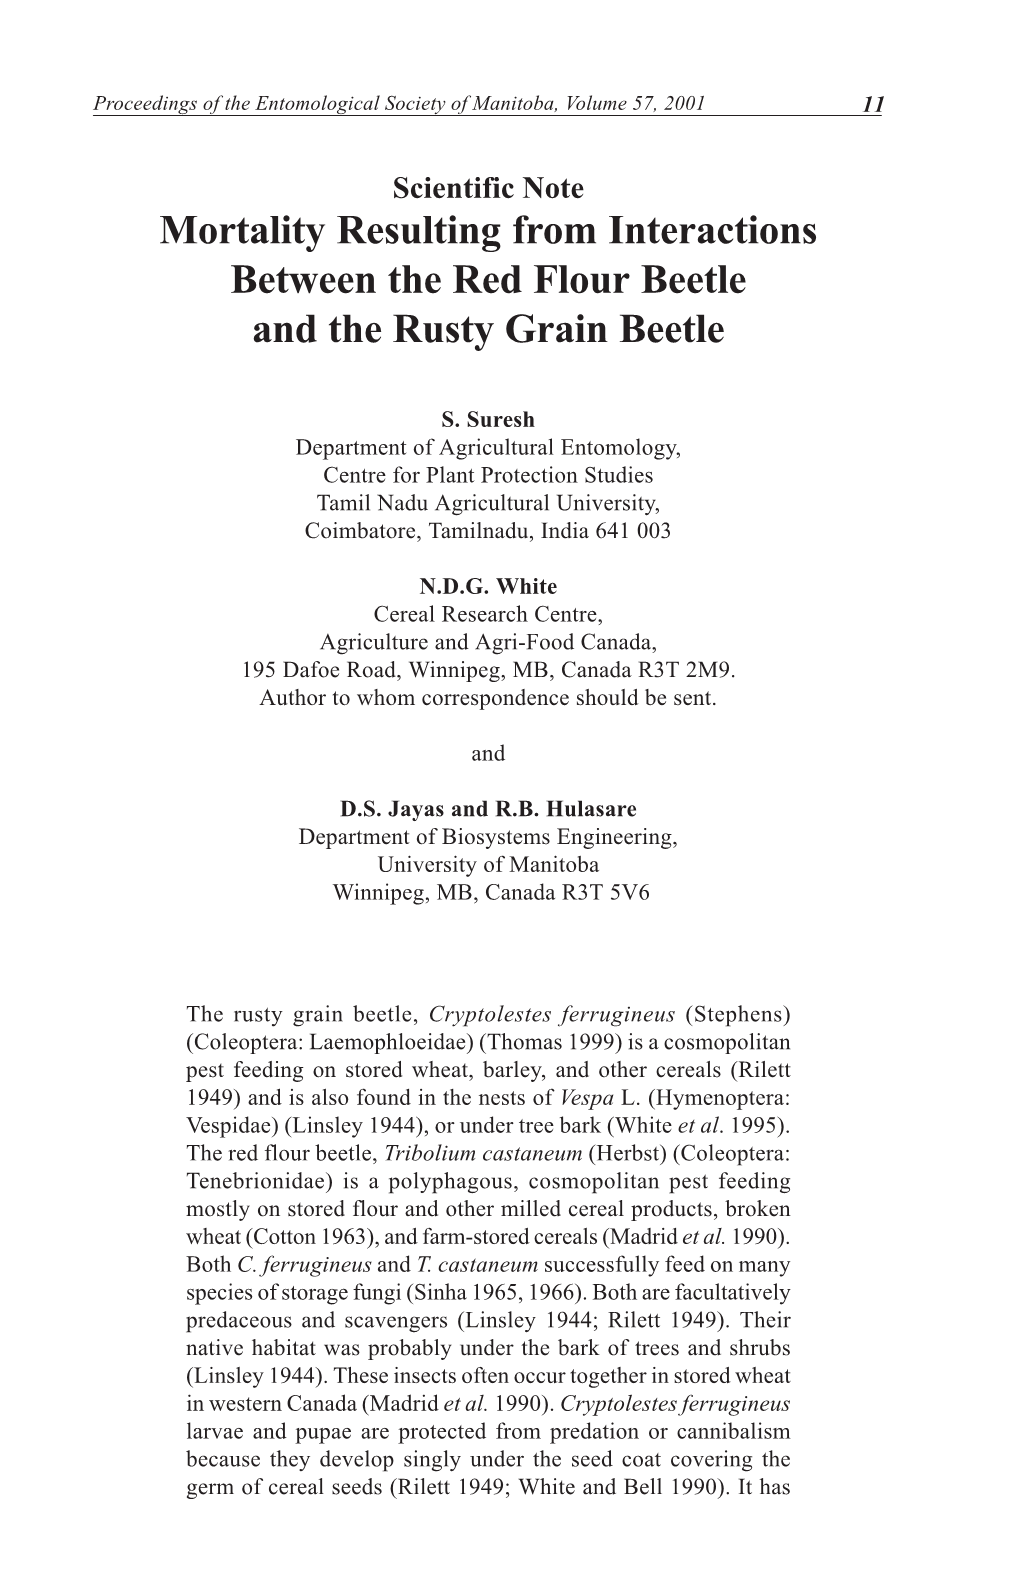 Mortality Resulting from Interactions Between the Red Flour Beetle and the Rusty Grain Beetle